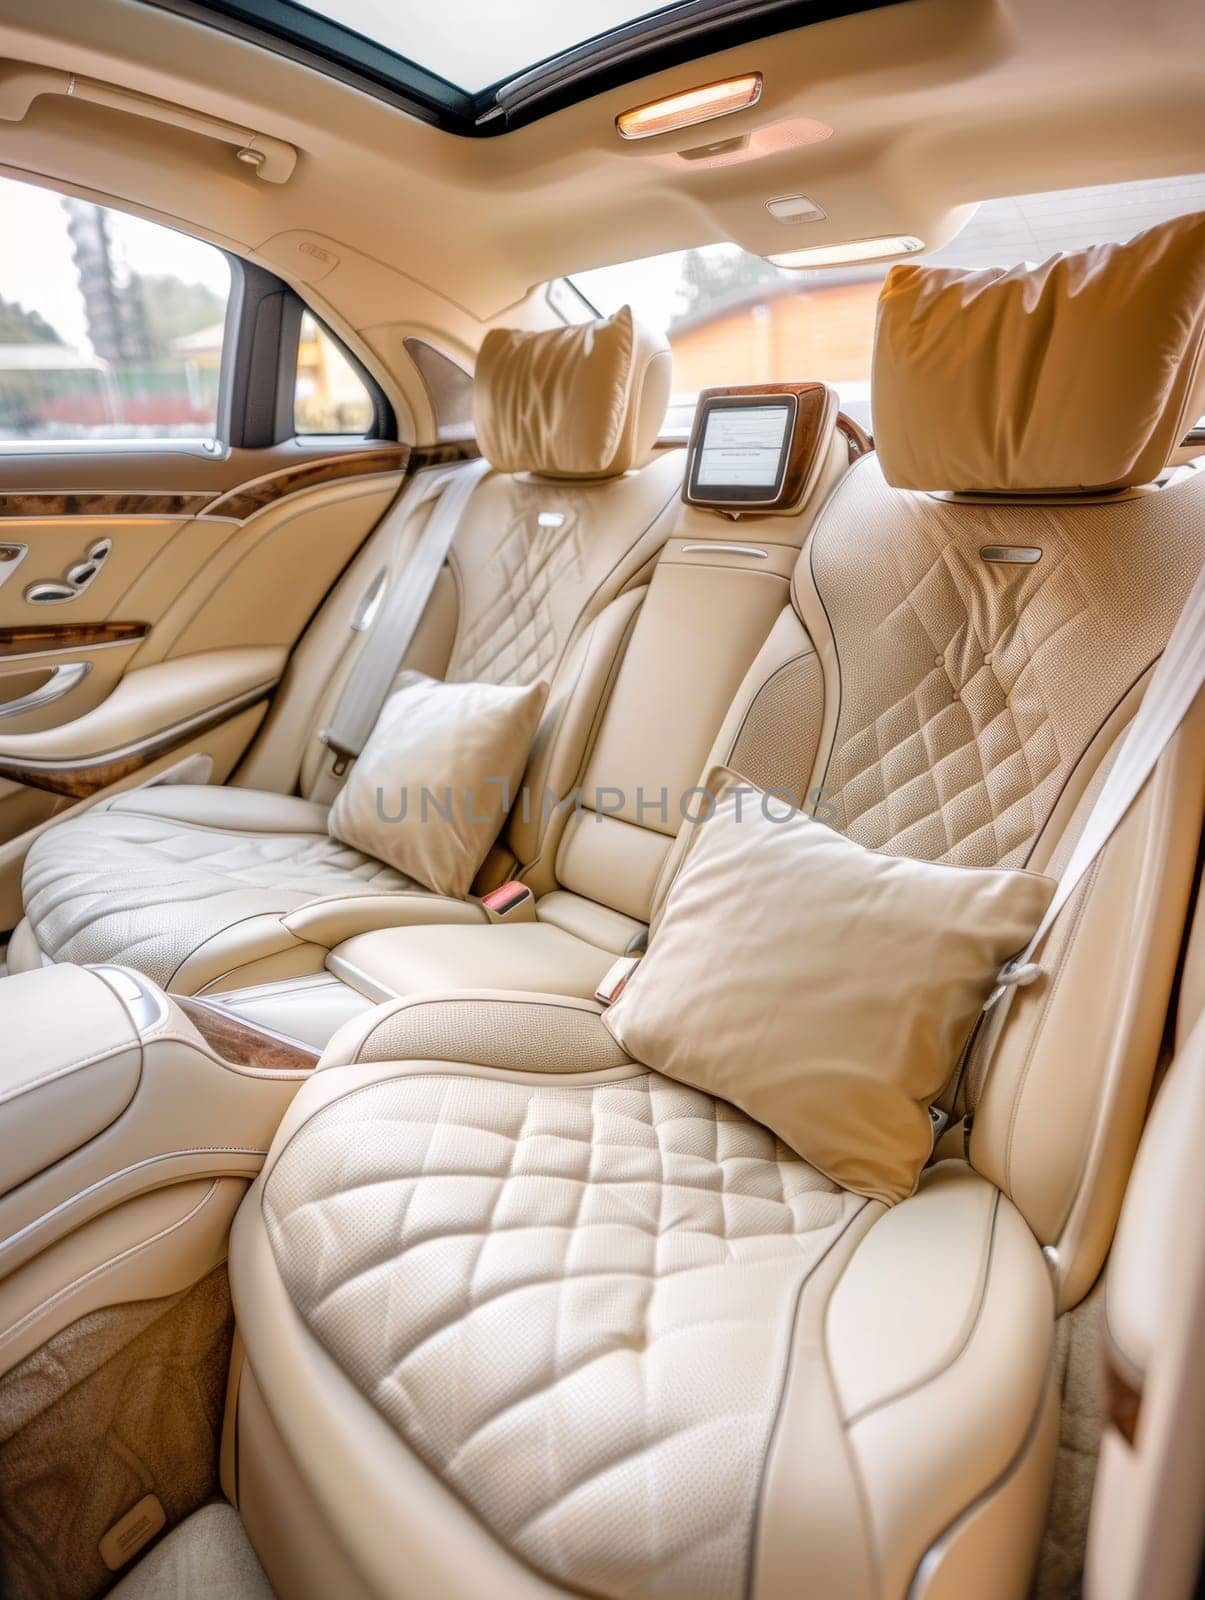 The luxurious cabin of a high-end vehicle is outfitted with quilted leather seats, exuding an aura of exclusivity and sophistication. Detailed workmanship speaks to a bespoke automotive experience. by sfinks